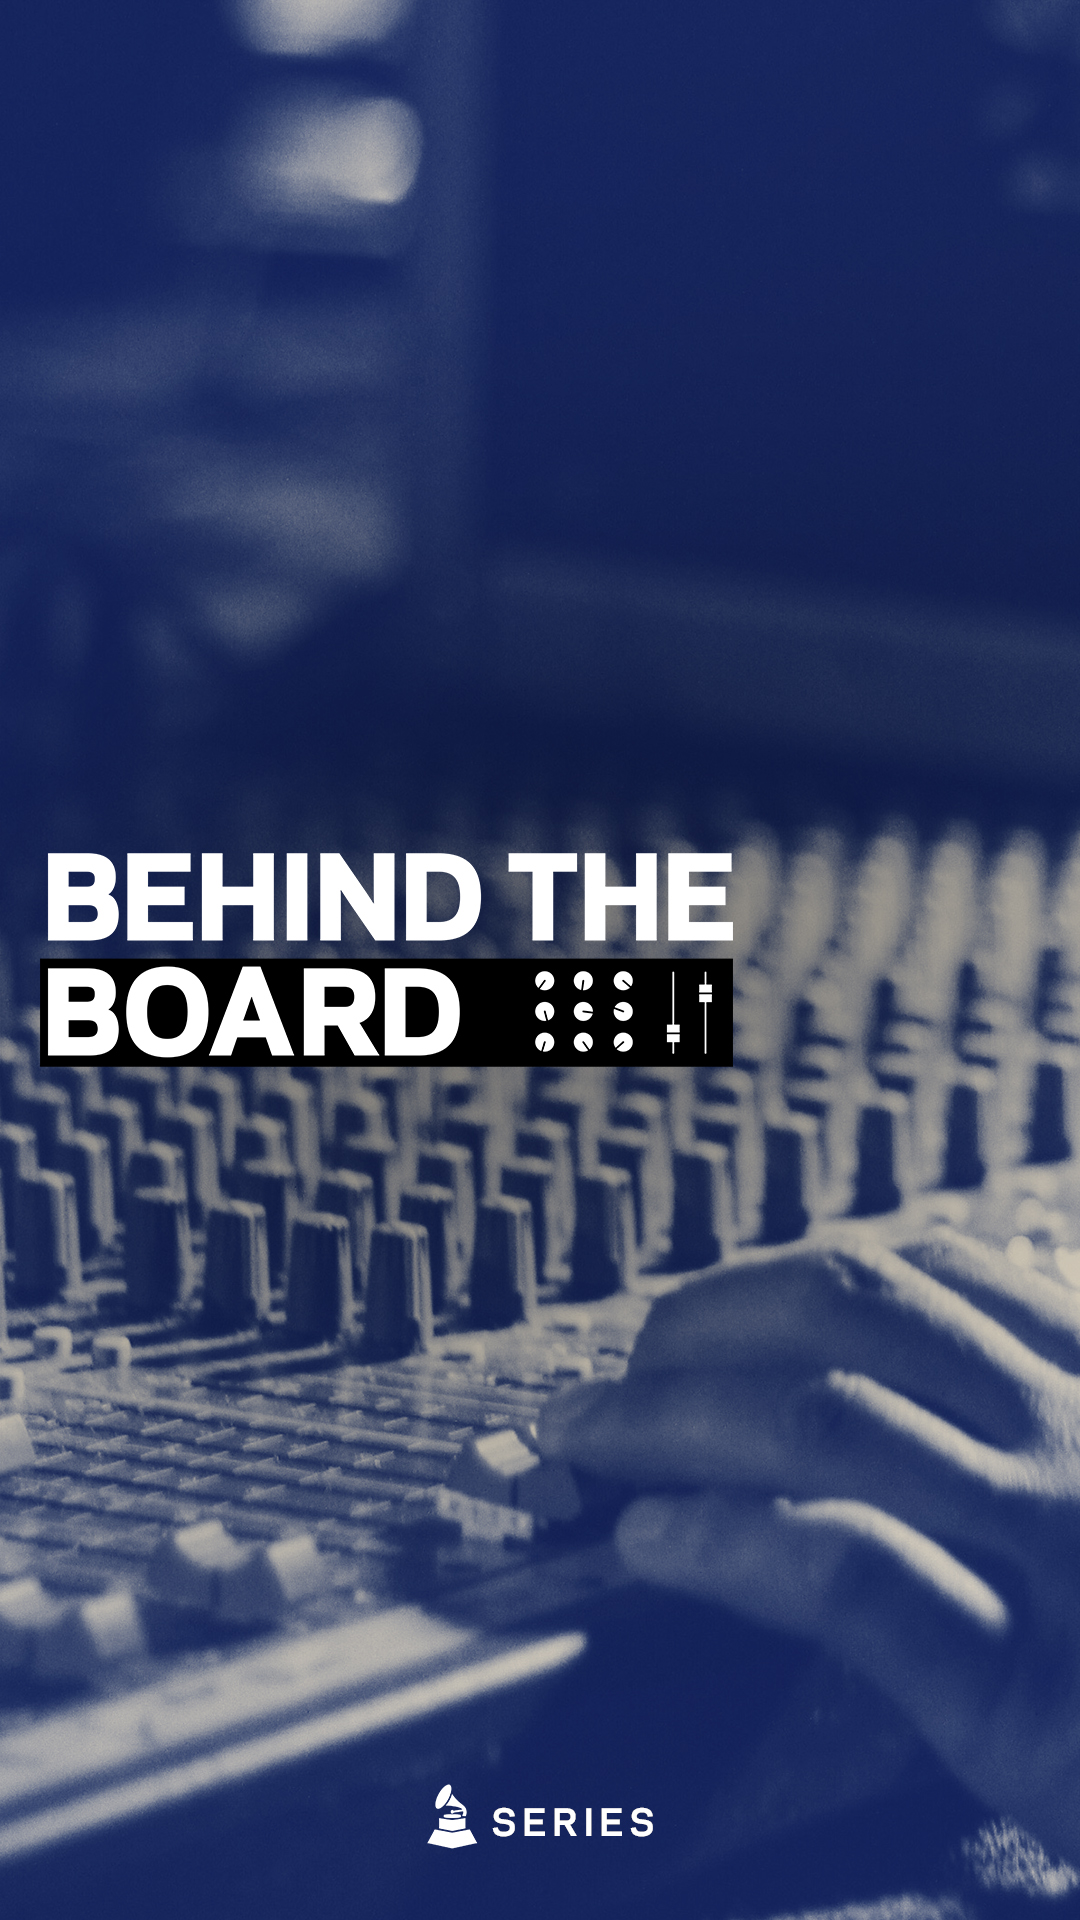 Jack Antonoff On Chasing Voices & Ignoring Outsiders | Behind The Board